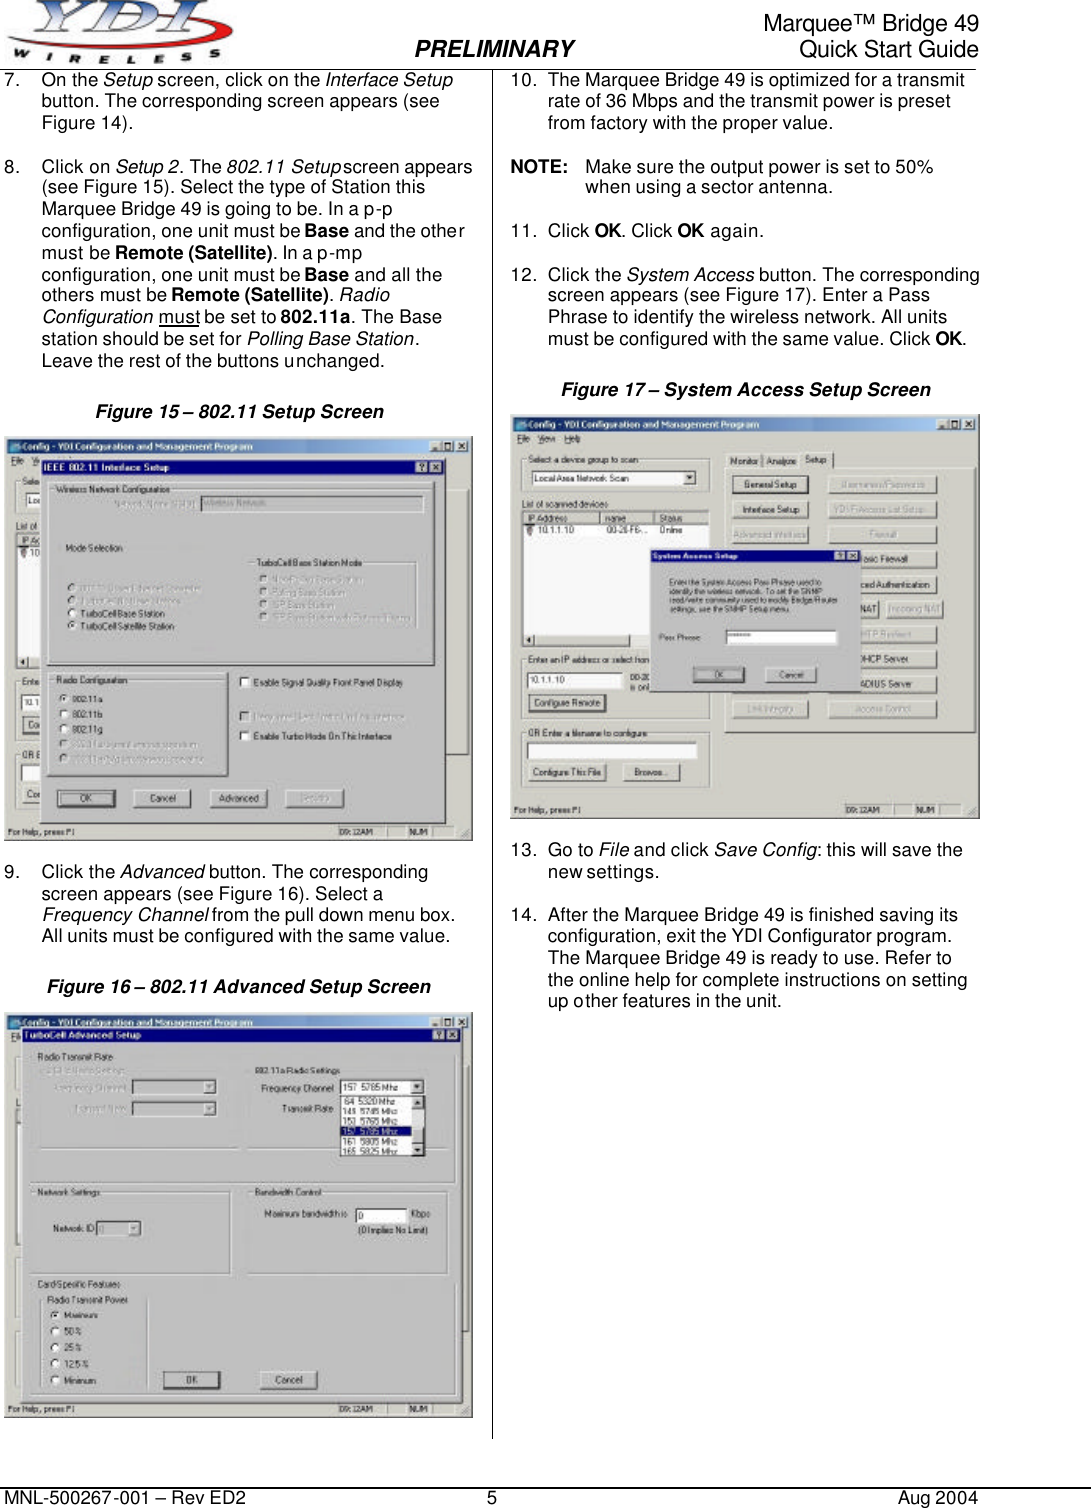     Marquee™ Bridge 49  PRELIMINARY Quick Start Guide MNL-500267-001 – Rev ED2 5 Aug 2004 7. On the Setup screen, click on the Interface Setup button. The corresponding screen appears (see Figure 14).  8. Click on Setup 2. The 802.11 Setup screen appears (see Figure 15). Select the type of Station this Marquee Bridge 49 is going to be. In a p-p configuration, one unit must be Base and the other must be Remote (Satellite). In a p-mp configuration, one unit must be Base and all the others must be Remote (Satellite). Radio Configuration must be set to 802.11a. The Base station should be set for Polling Base Station. Leave the rest of the buttons unchanged. Figure 15 – 802.11 Setup Screen   9. Click the Advanced button. The corresponding screen appears (see Figure 16). Select a Frequency Channel from the pull down menu box. All units must be configured with the same value. Figure 16 – 802.11 Advanced Setup Screen   10. The Marquee Bridge 49 is optimized for a transmit rate of 36 Mbps and the transmit power is preset from factory with the proper value.  NOTE: Make sure the output power is set to 50% when using a sector antenna.  11. Click OK. Click OK again.  12. Click the System Access button. The corresponding screen appears (see Figure 17). Enter a Pass Phrase to identify the wireless network. All units must be configured with the same value. Click OK. Figure 17 – System Access Setup Screen   13. Go to File and click Save Config: this will save the new settings.  14. After the Marquee Bridge 49 is finished saving its configuration, exit the YDI Configurator program. The Marquee Bridge 49 is ready to use. Refer to the online help for complete instructions on setting up other features in the unit. 